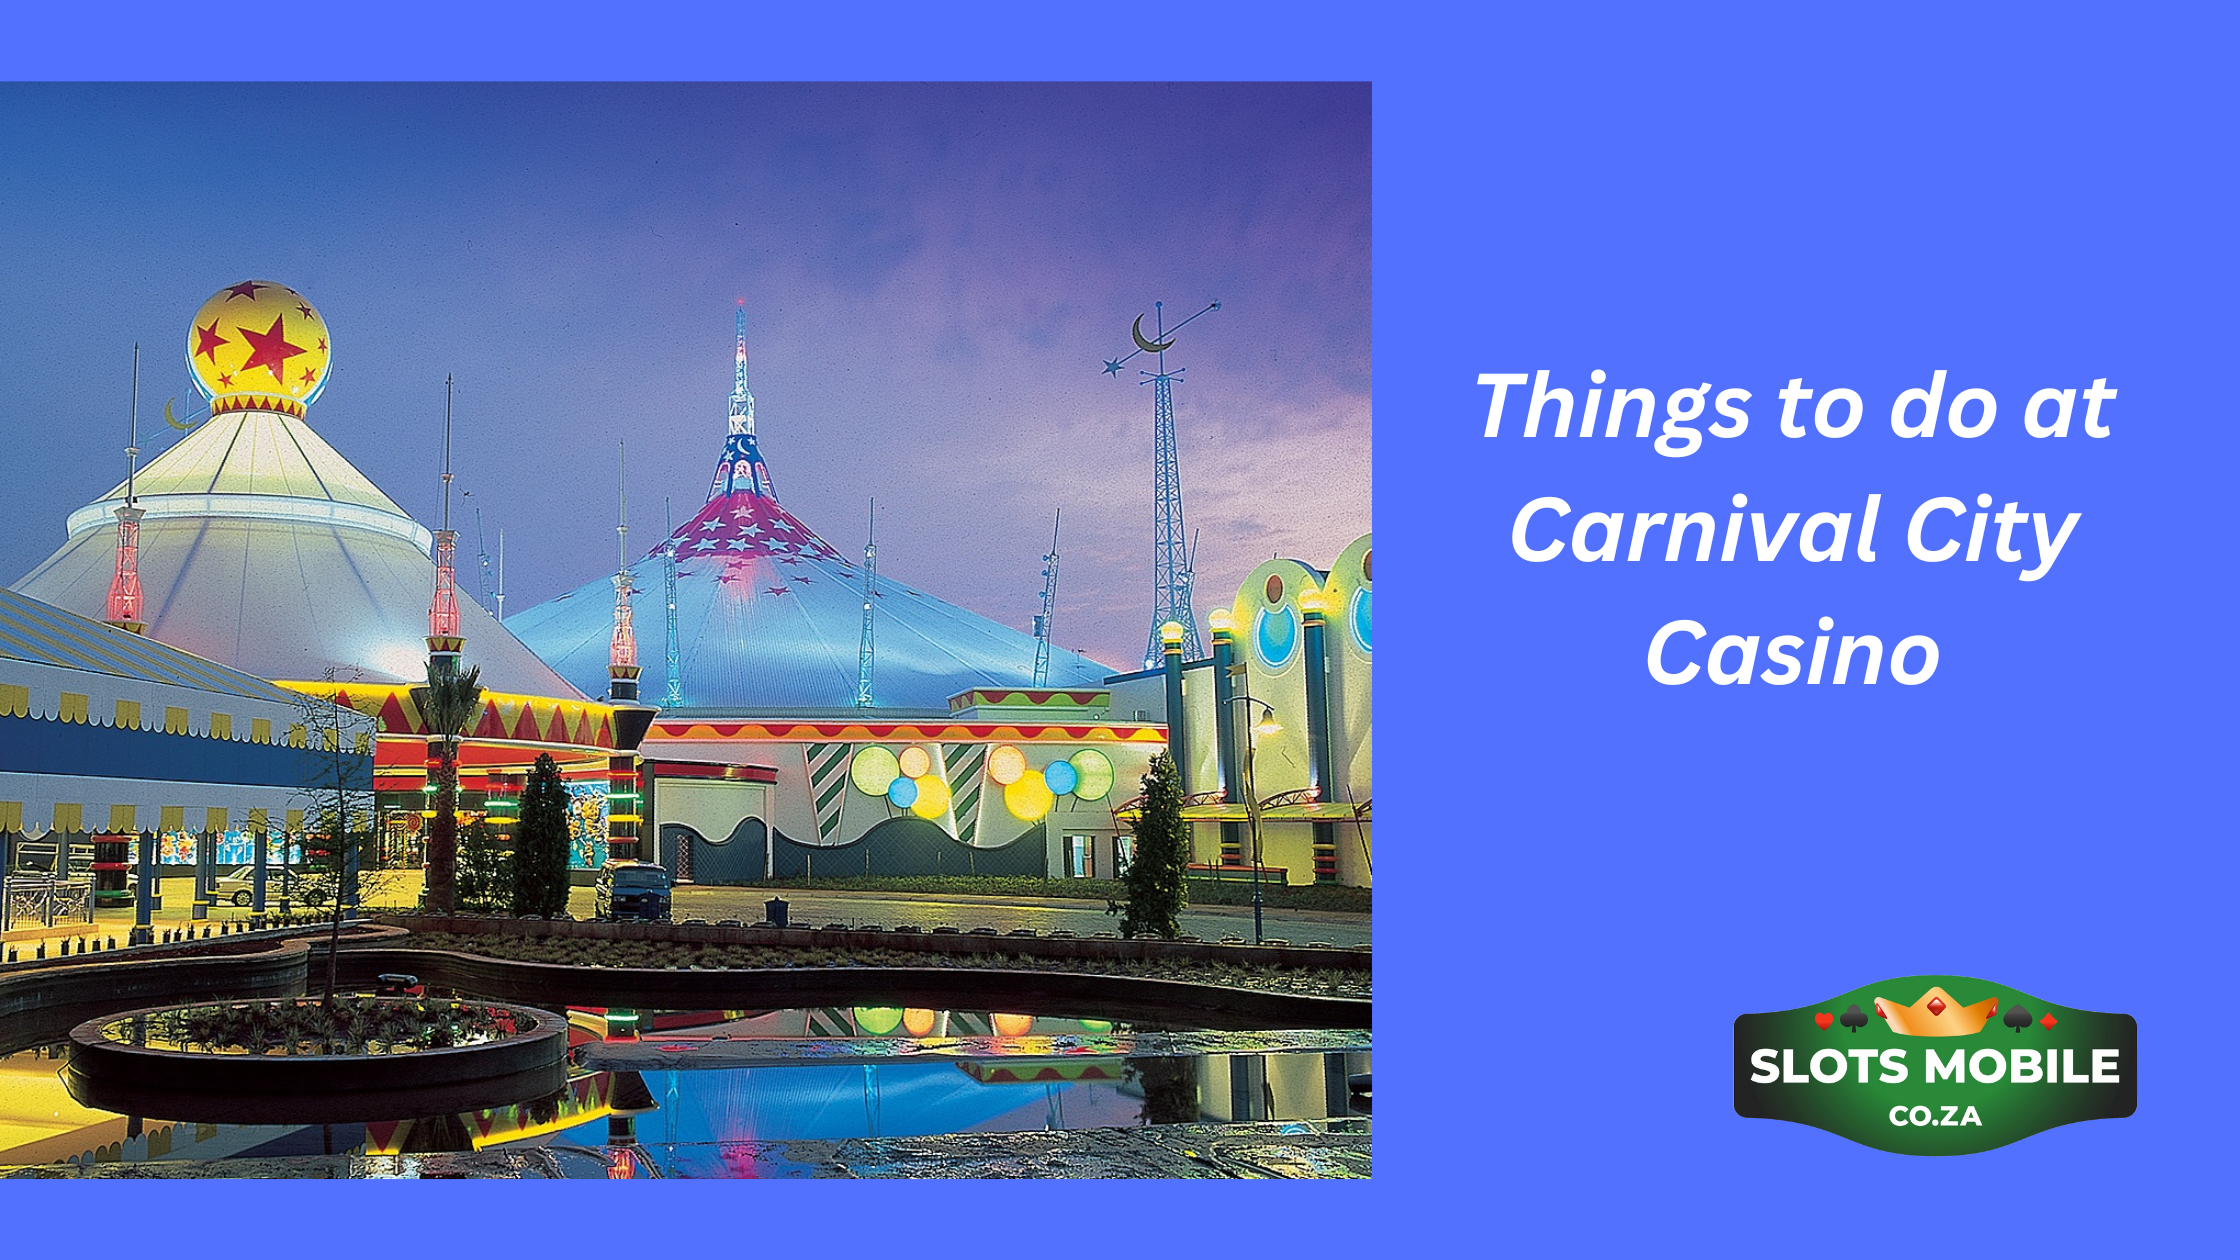 Things to do at Carnival City Casino